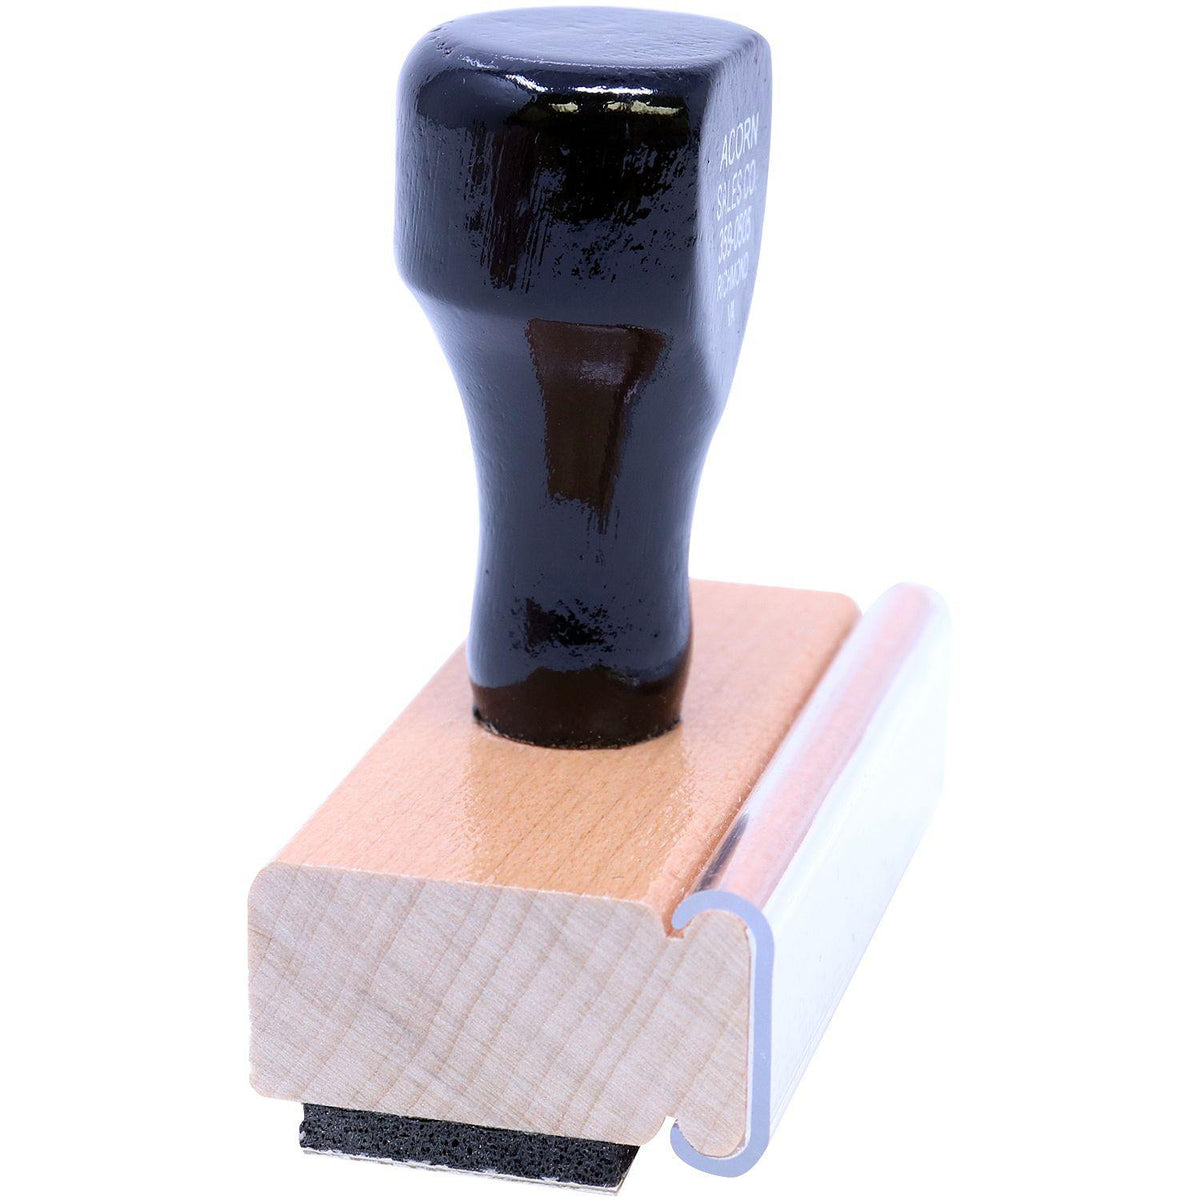 Side View of Large Pregnant Rubber Stamp at an Angle